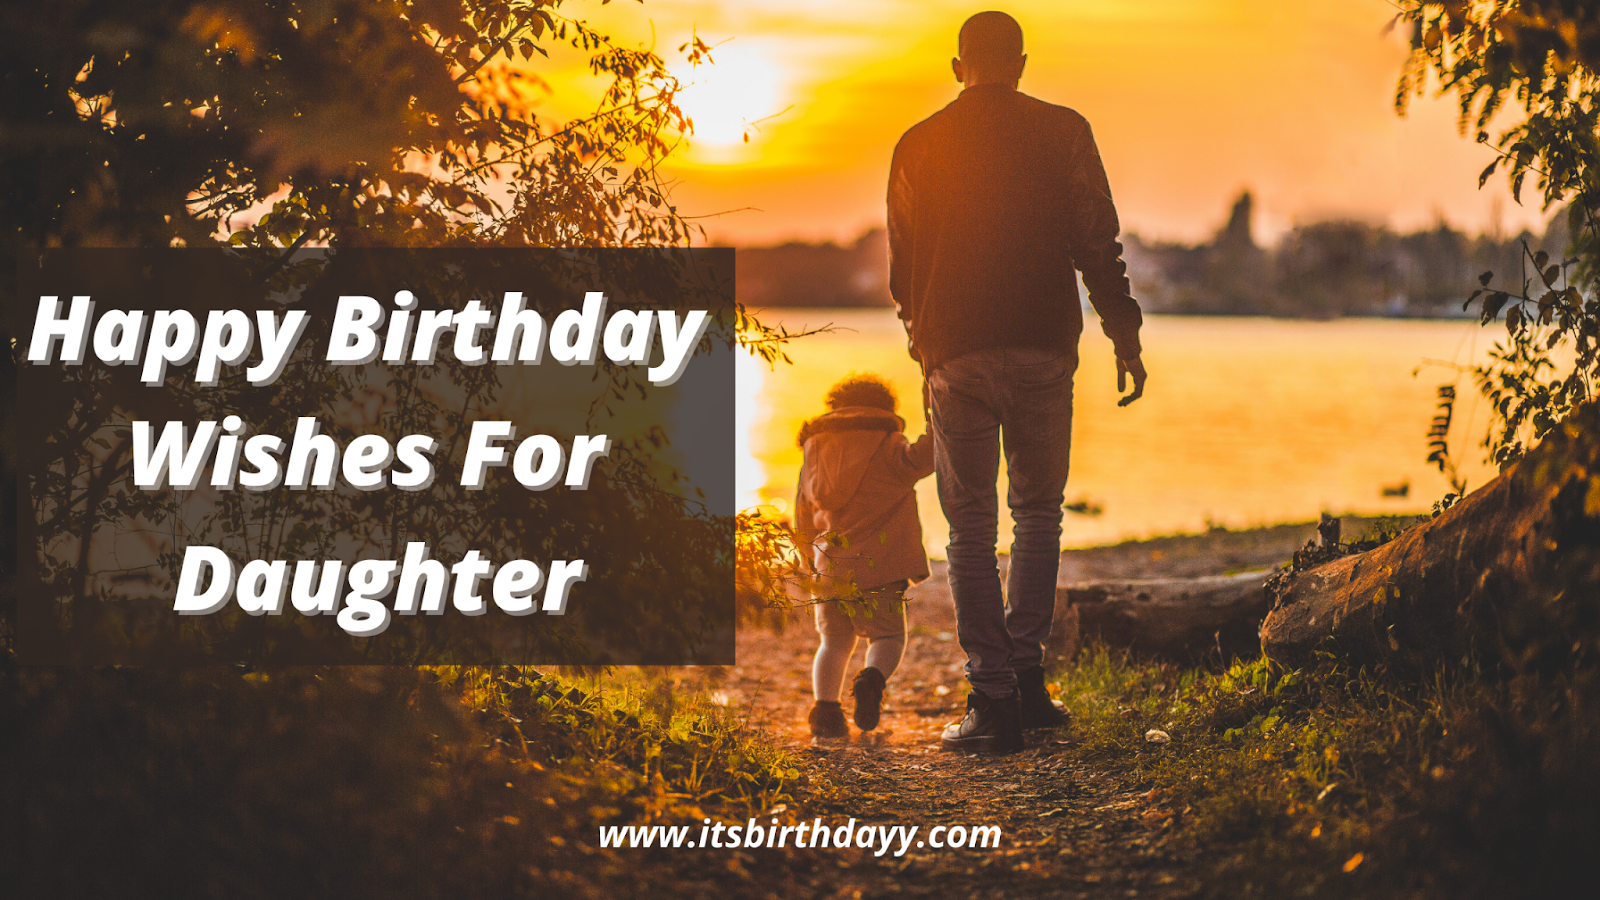 Happy Birthday Messages For Daughter